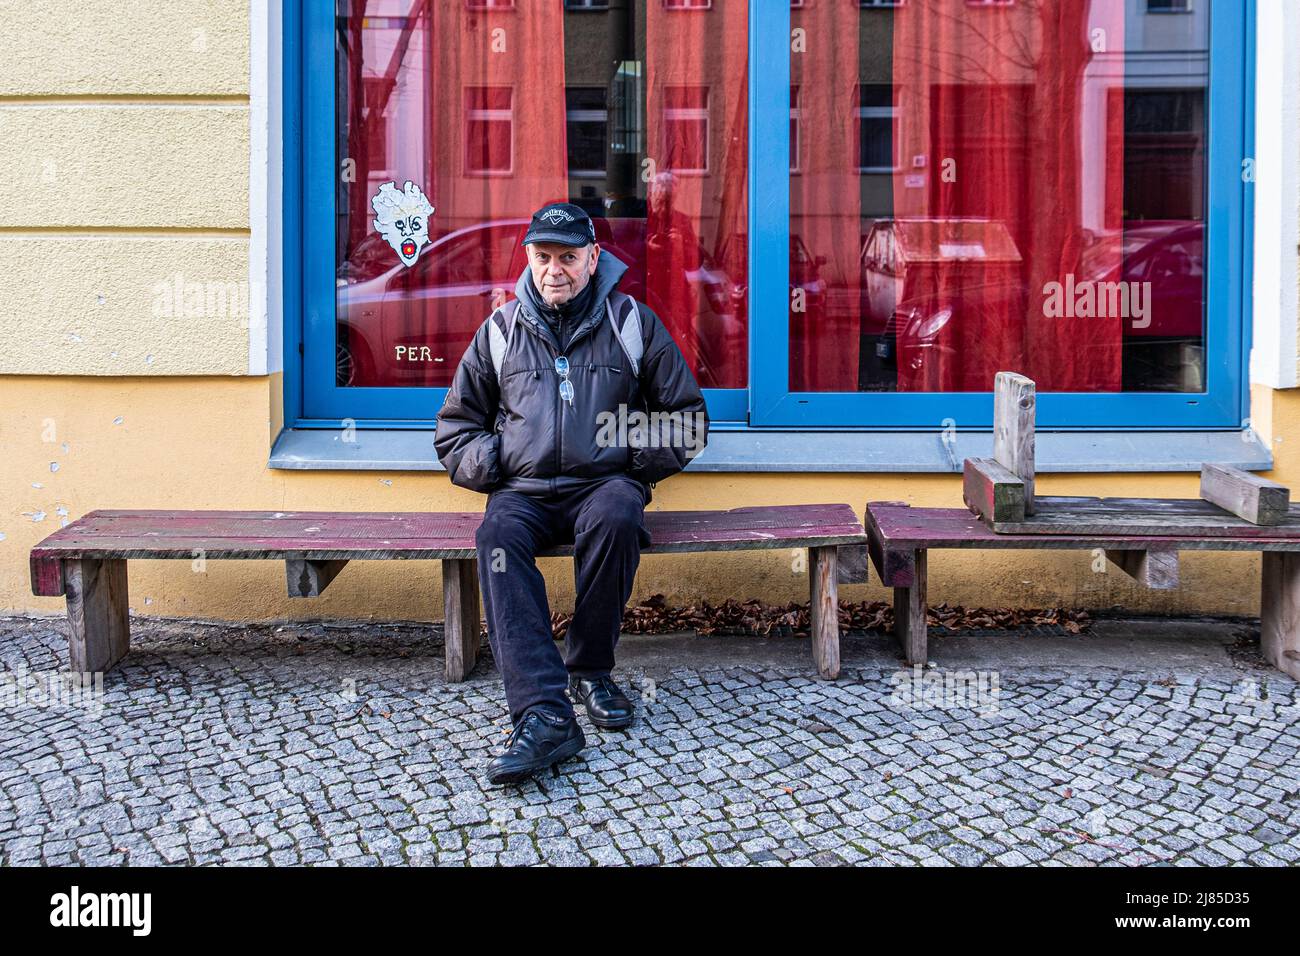 Senior male sitting on bench outside Perlin Wine Bar Exterior in Griebenowstrasse, Mitte, Berlin Stock Photo